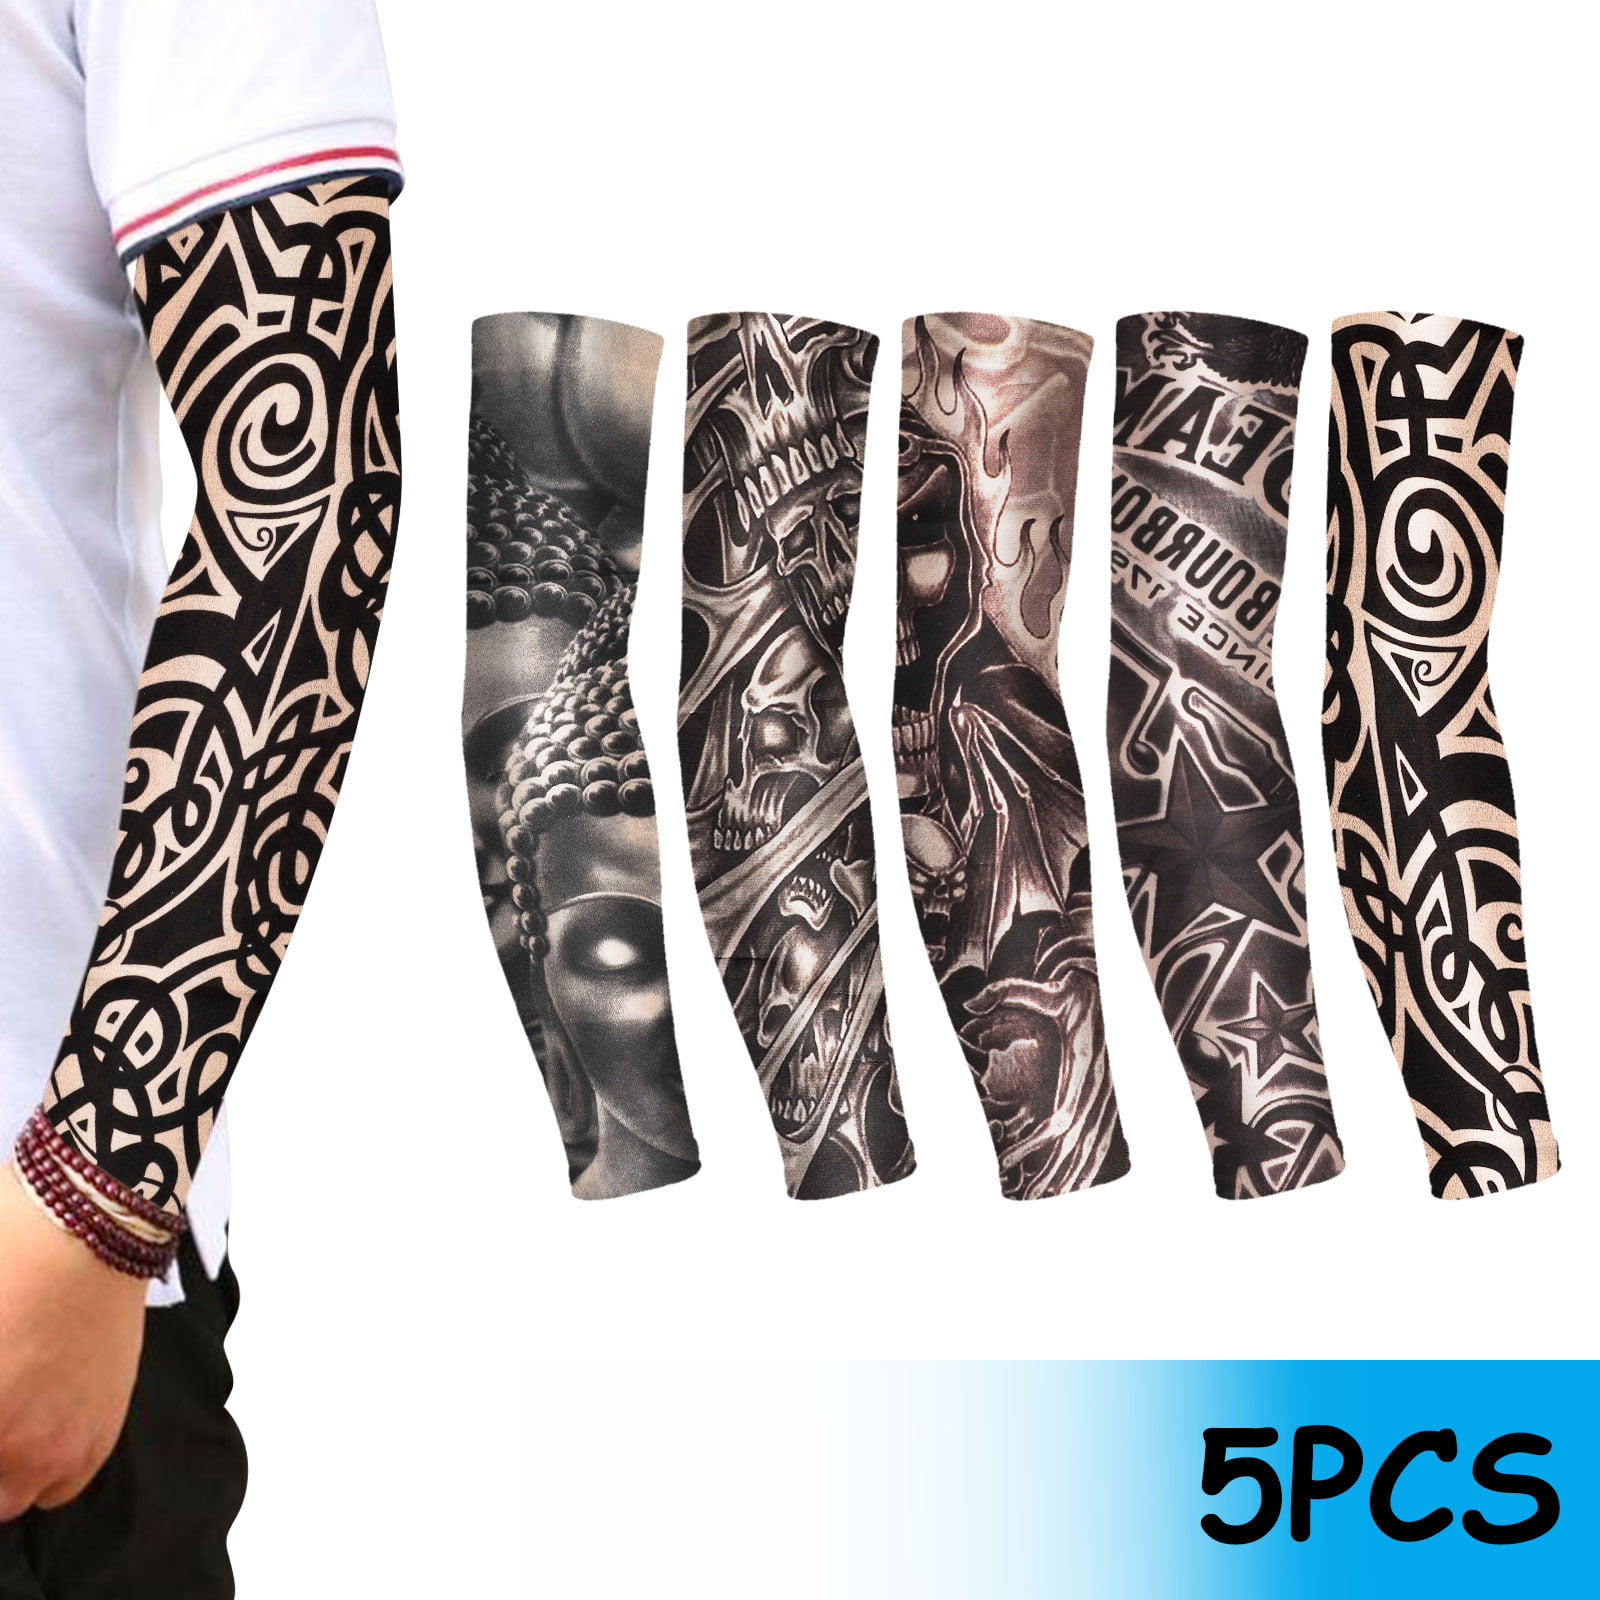 George Jimmy A Pair Of Outdoor Cycling Fishing Sleeves Arm Protection Sunscreen Tattoo Sleeve Arm Sleeve 